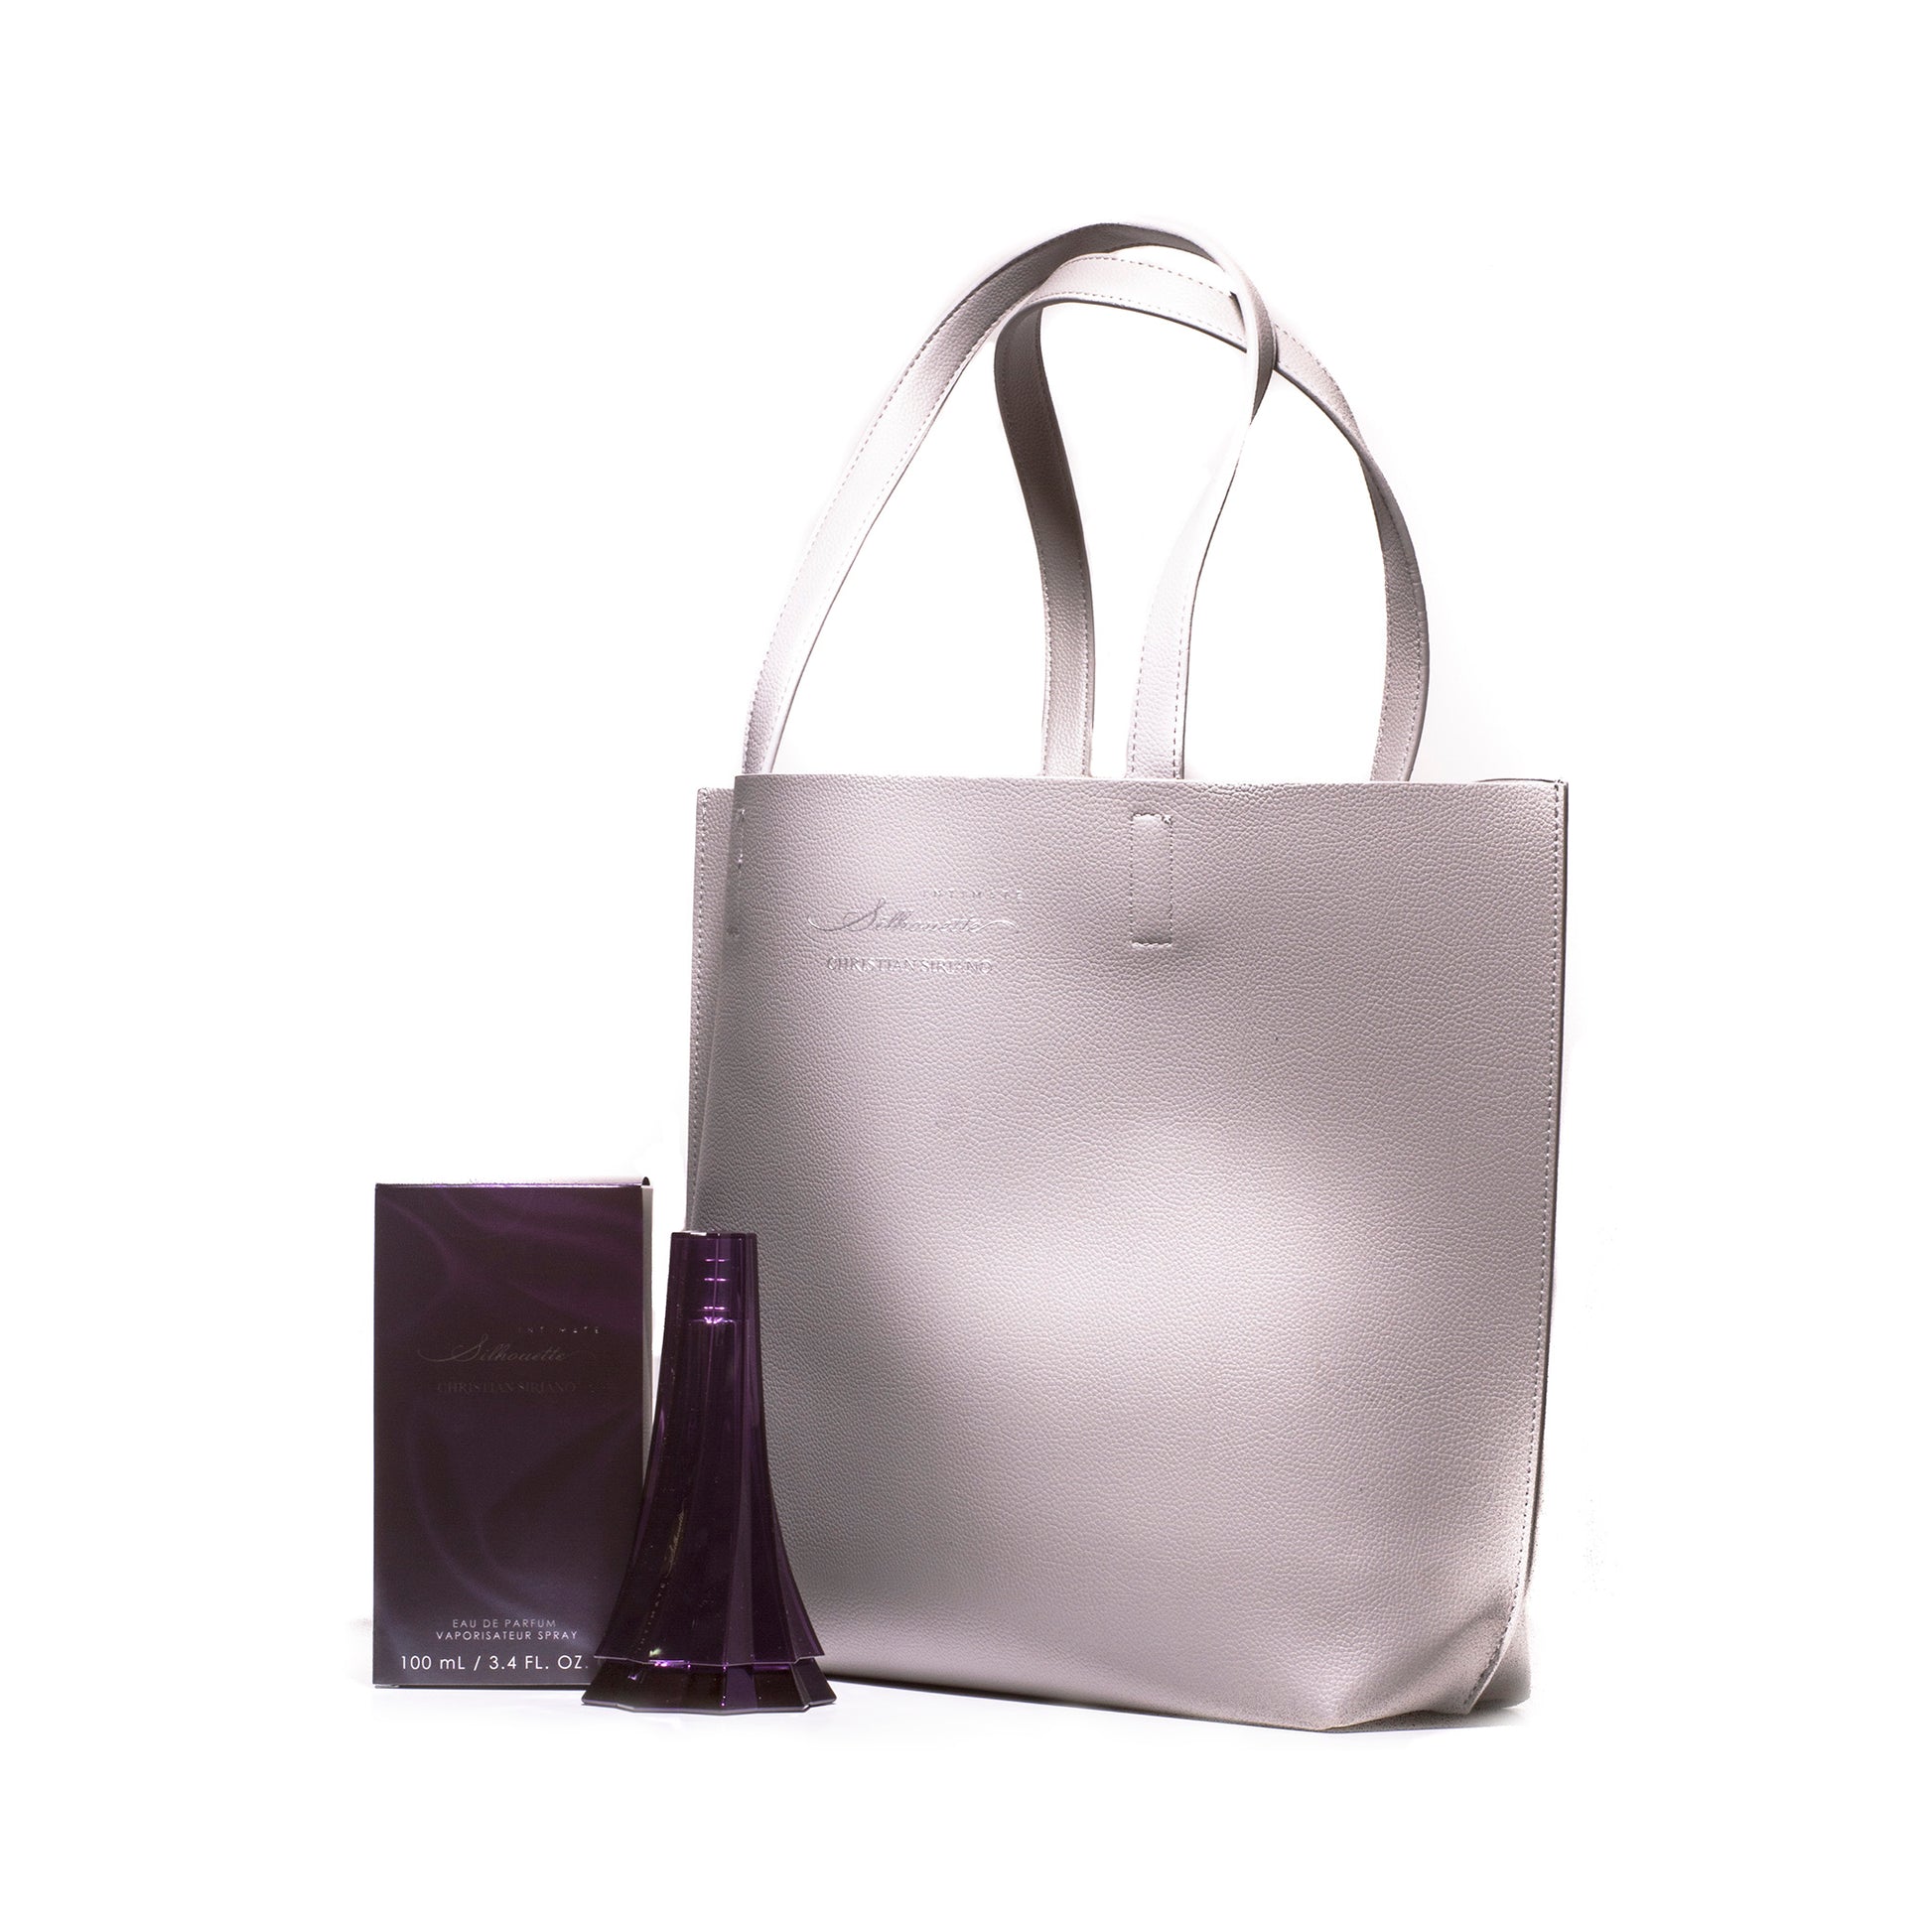 Intimate Silhouette Gift Set for Women 3.4 oz. Click to open in modal